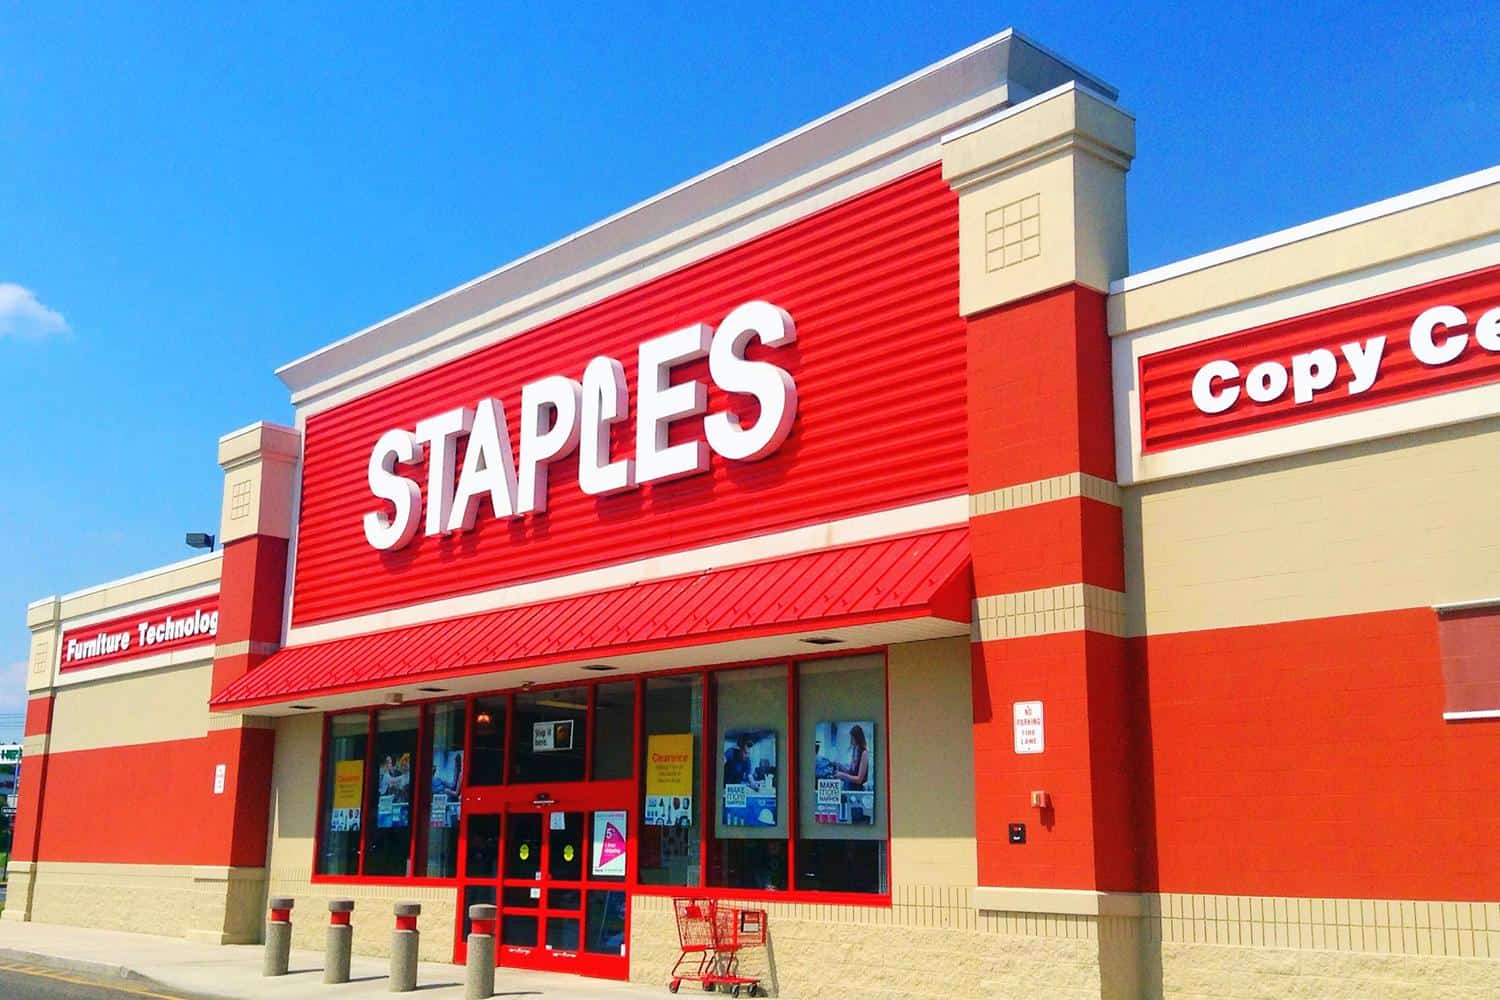 Staples UK acquired by Hilco Capital